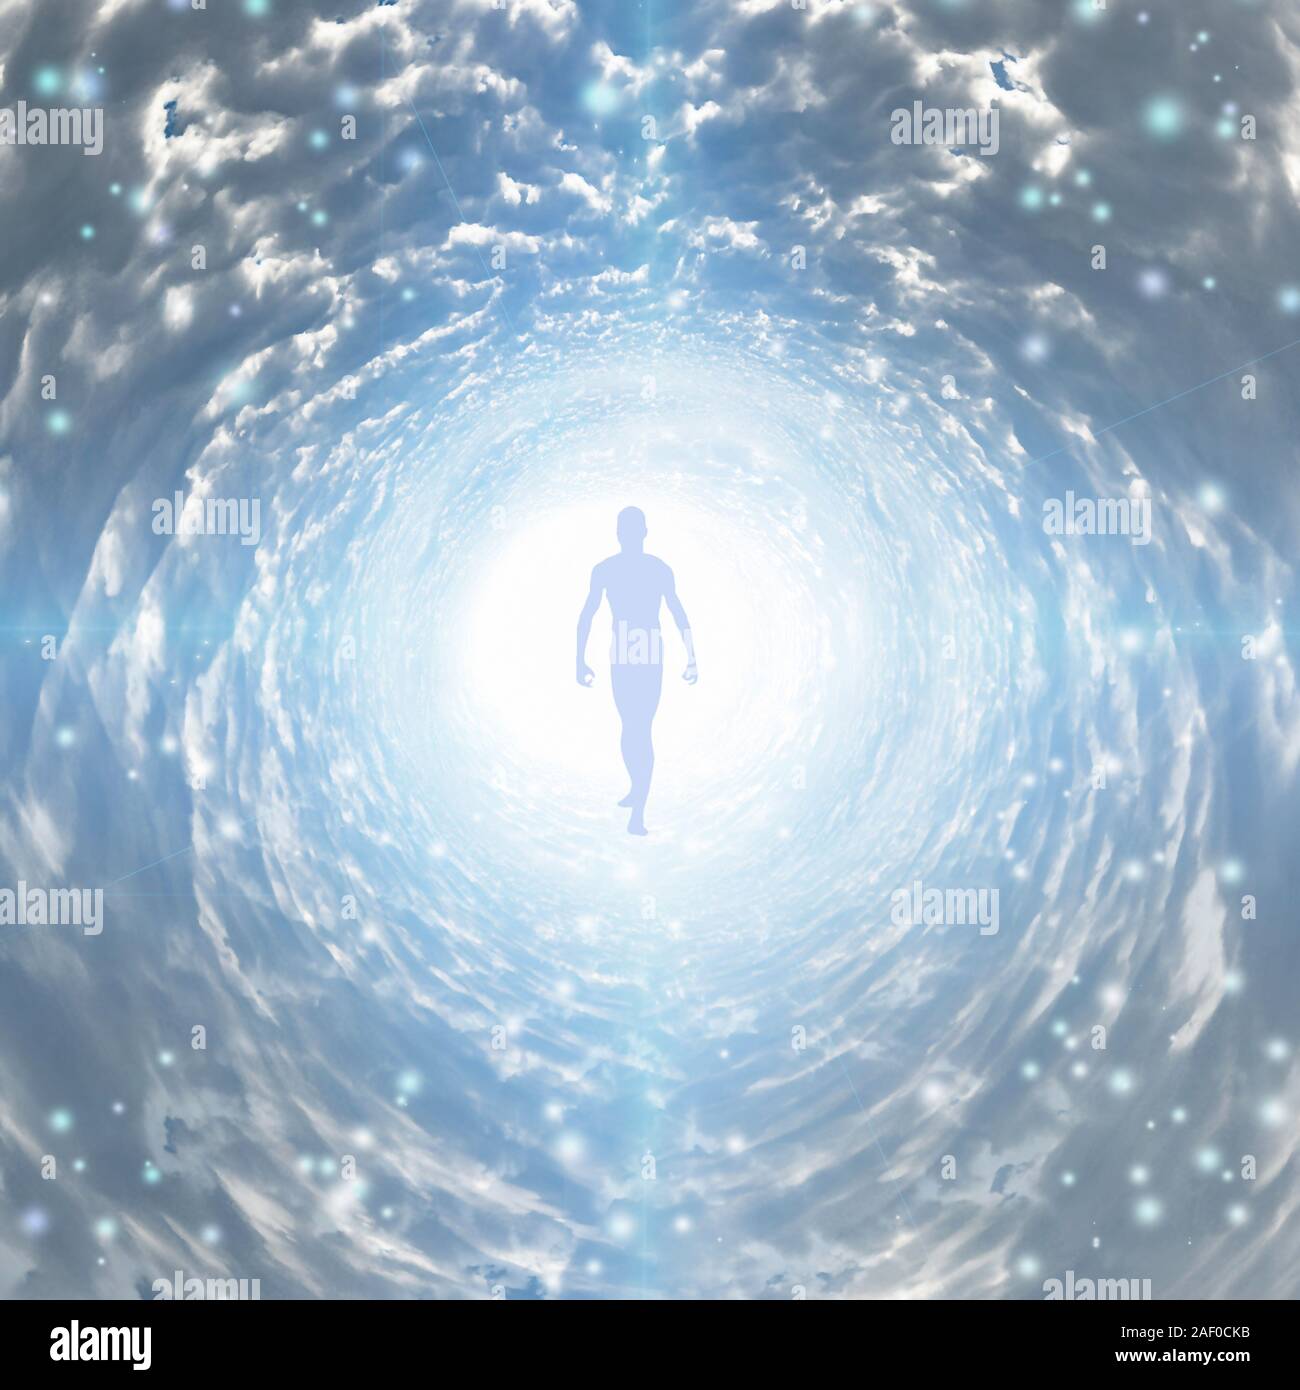 Tunnel of light with man figure Stock Photo